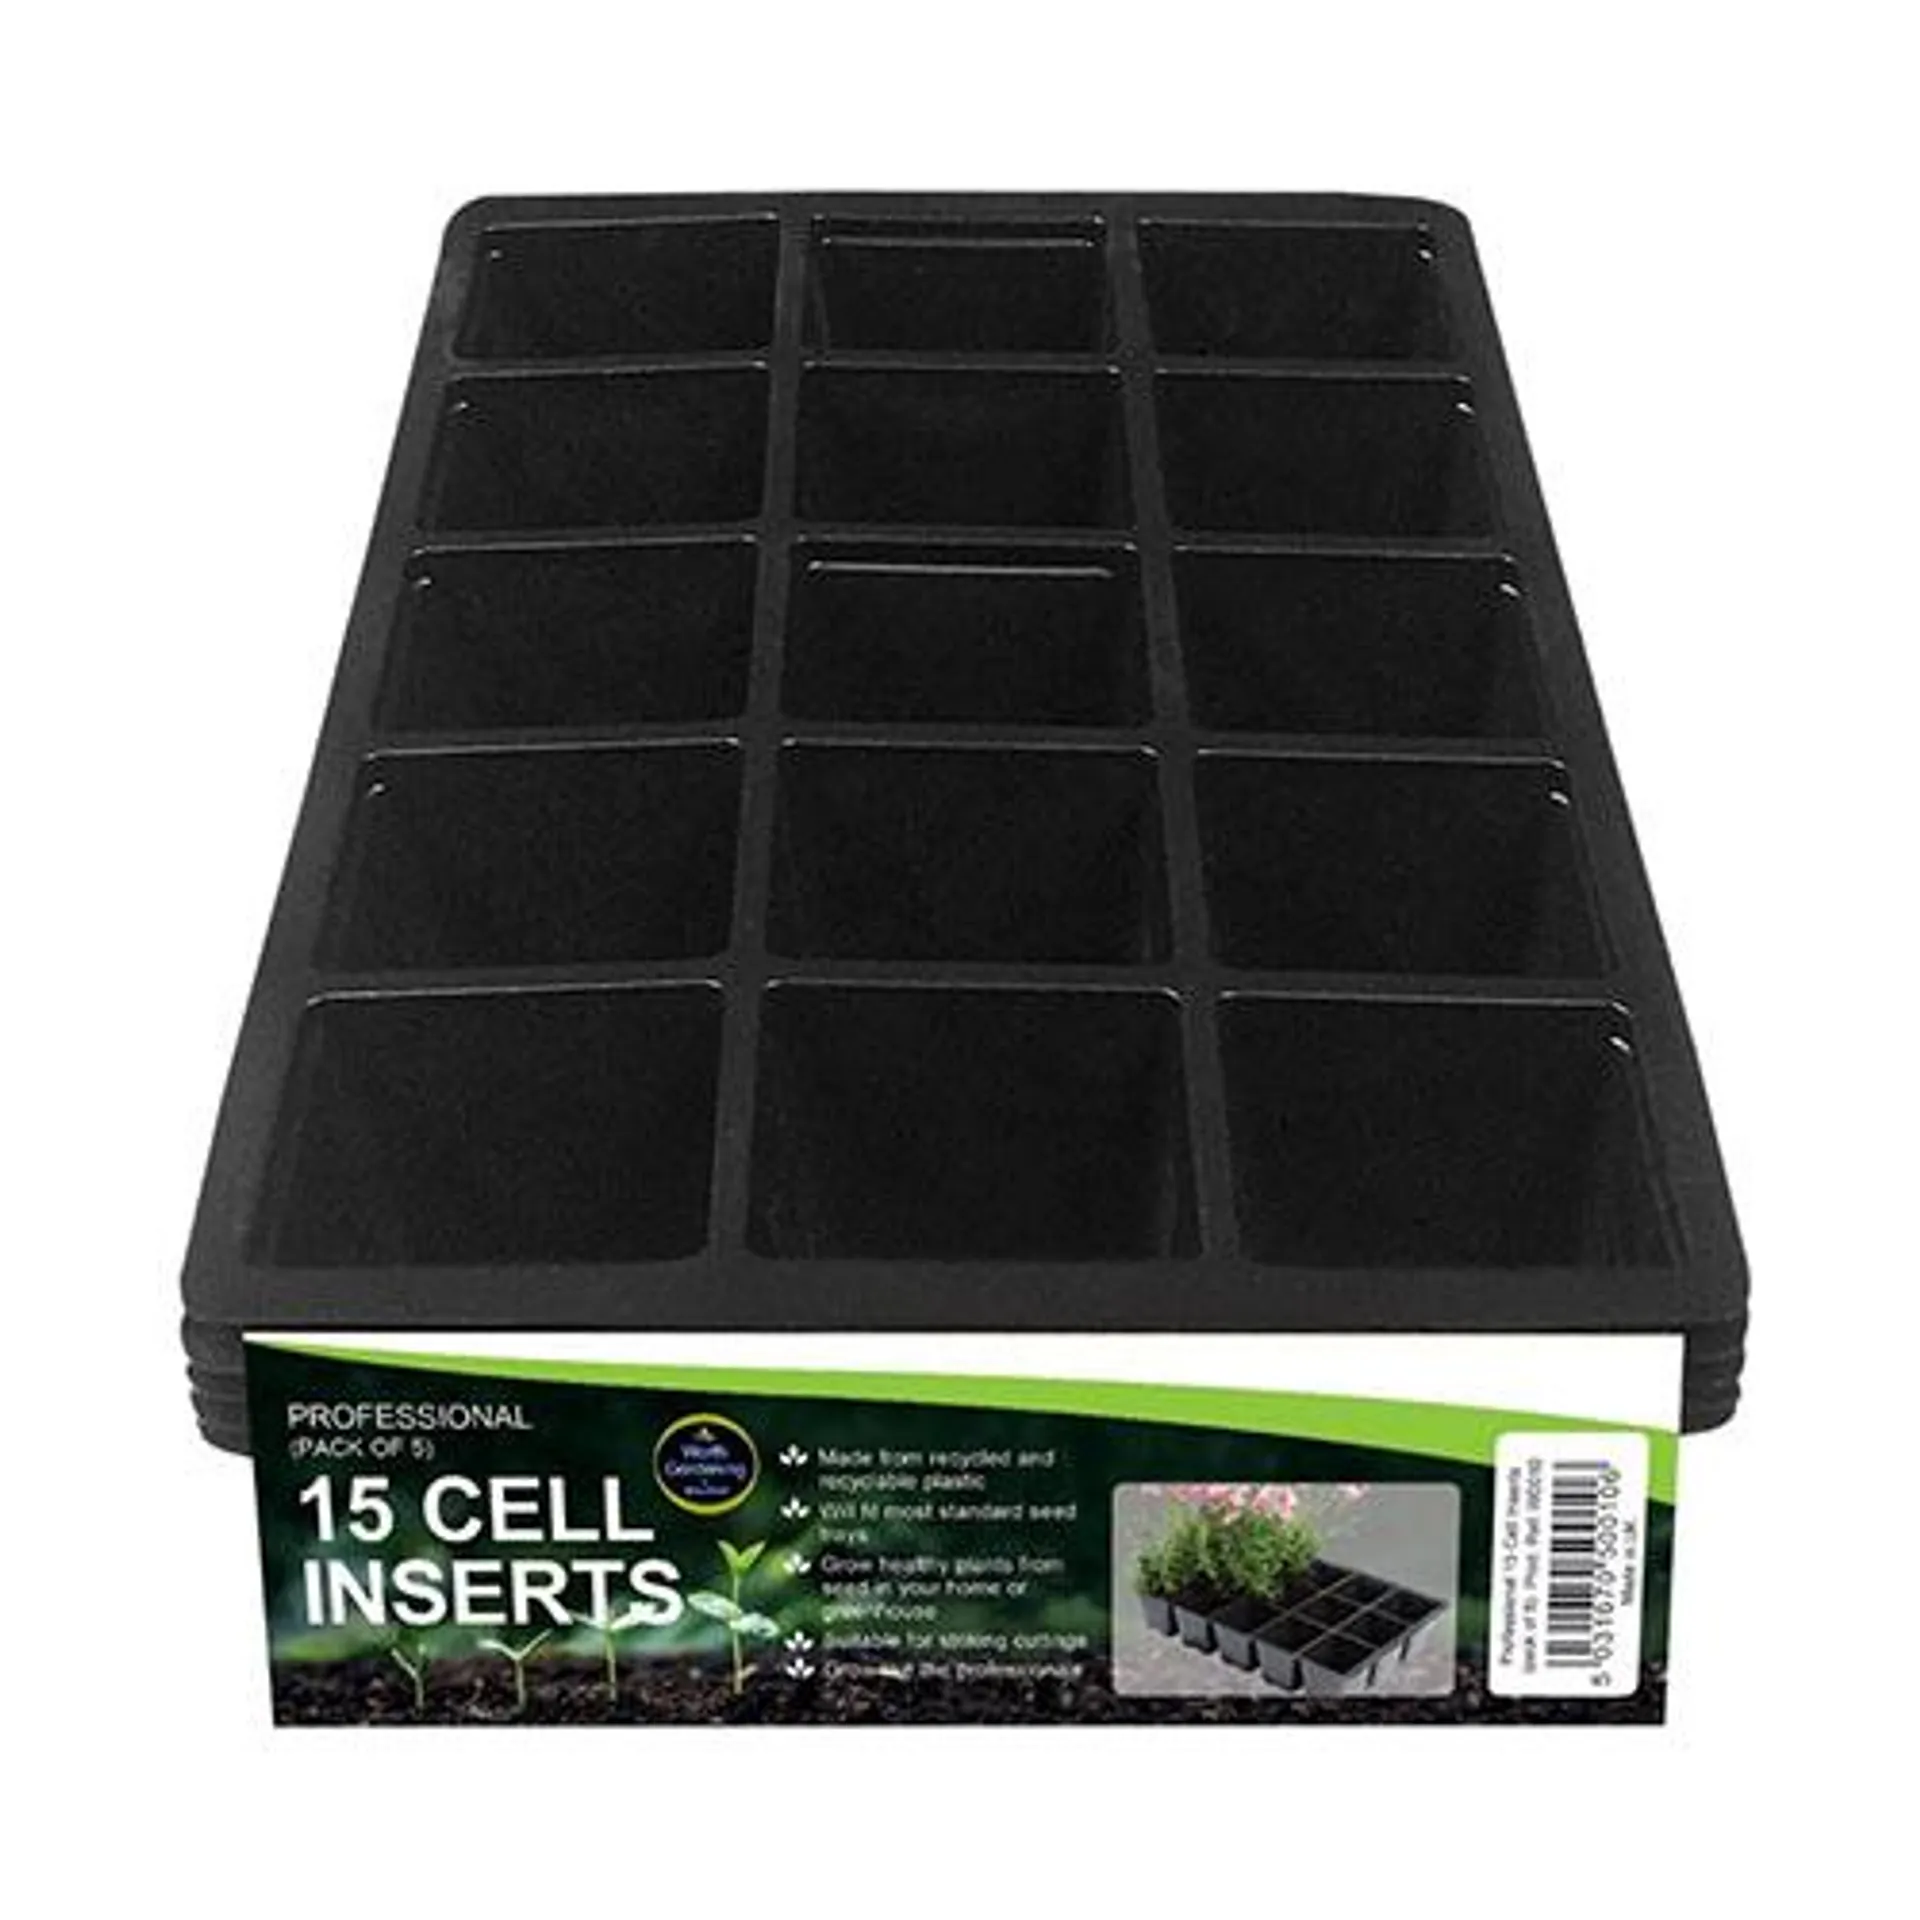 Professional 15 Cell Inserts - 5 Pack